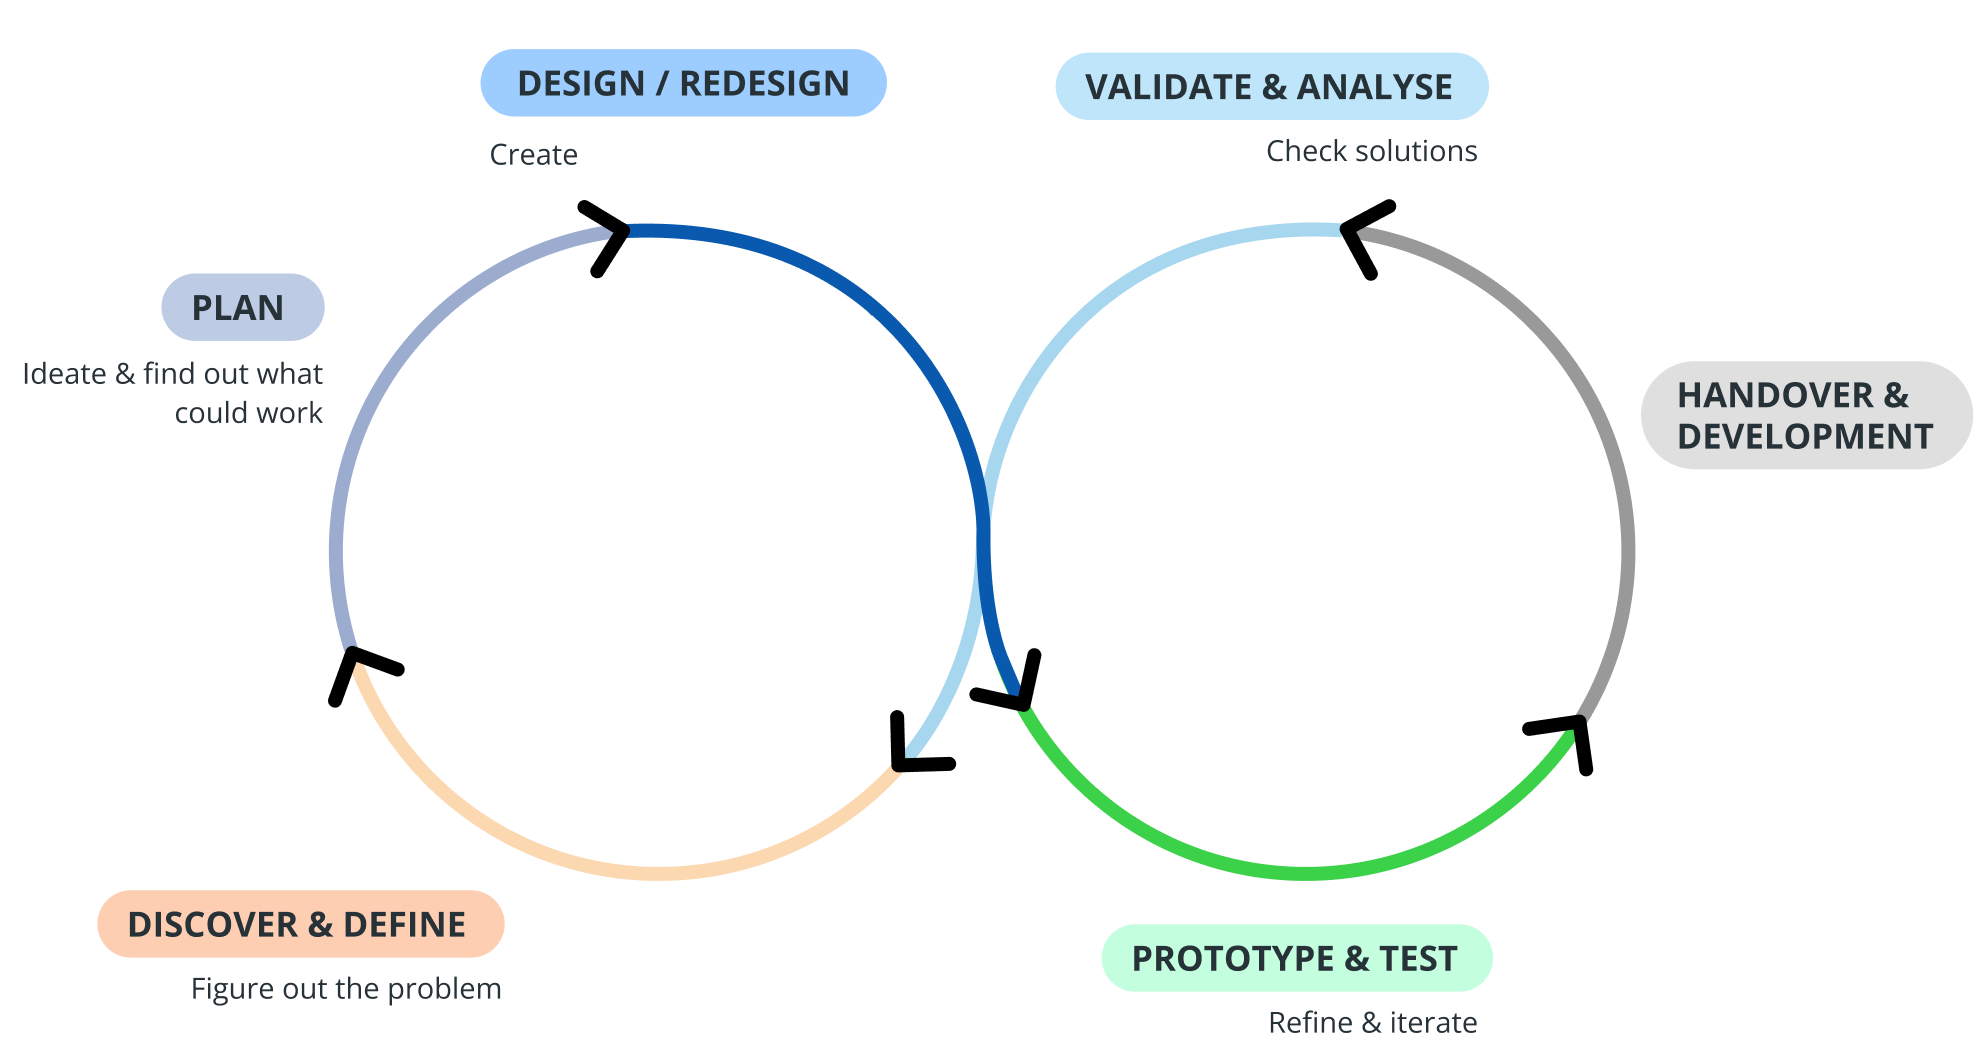 UX cycle image containing "Discover and Define", "Plan", "Design / Redesign", "Prototype and Test" phases